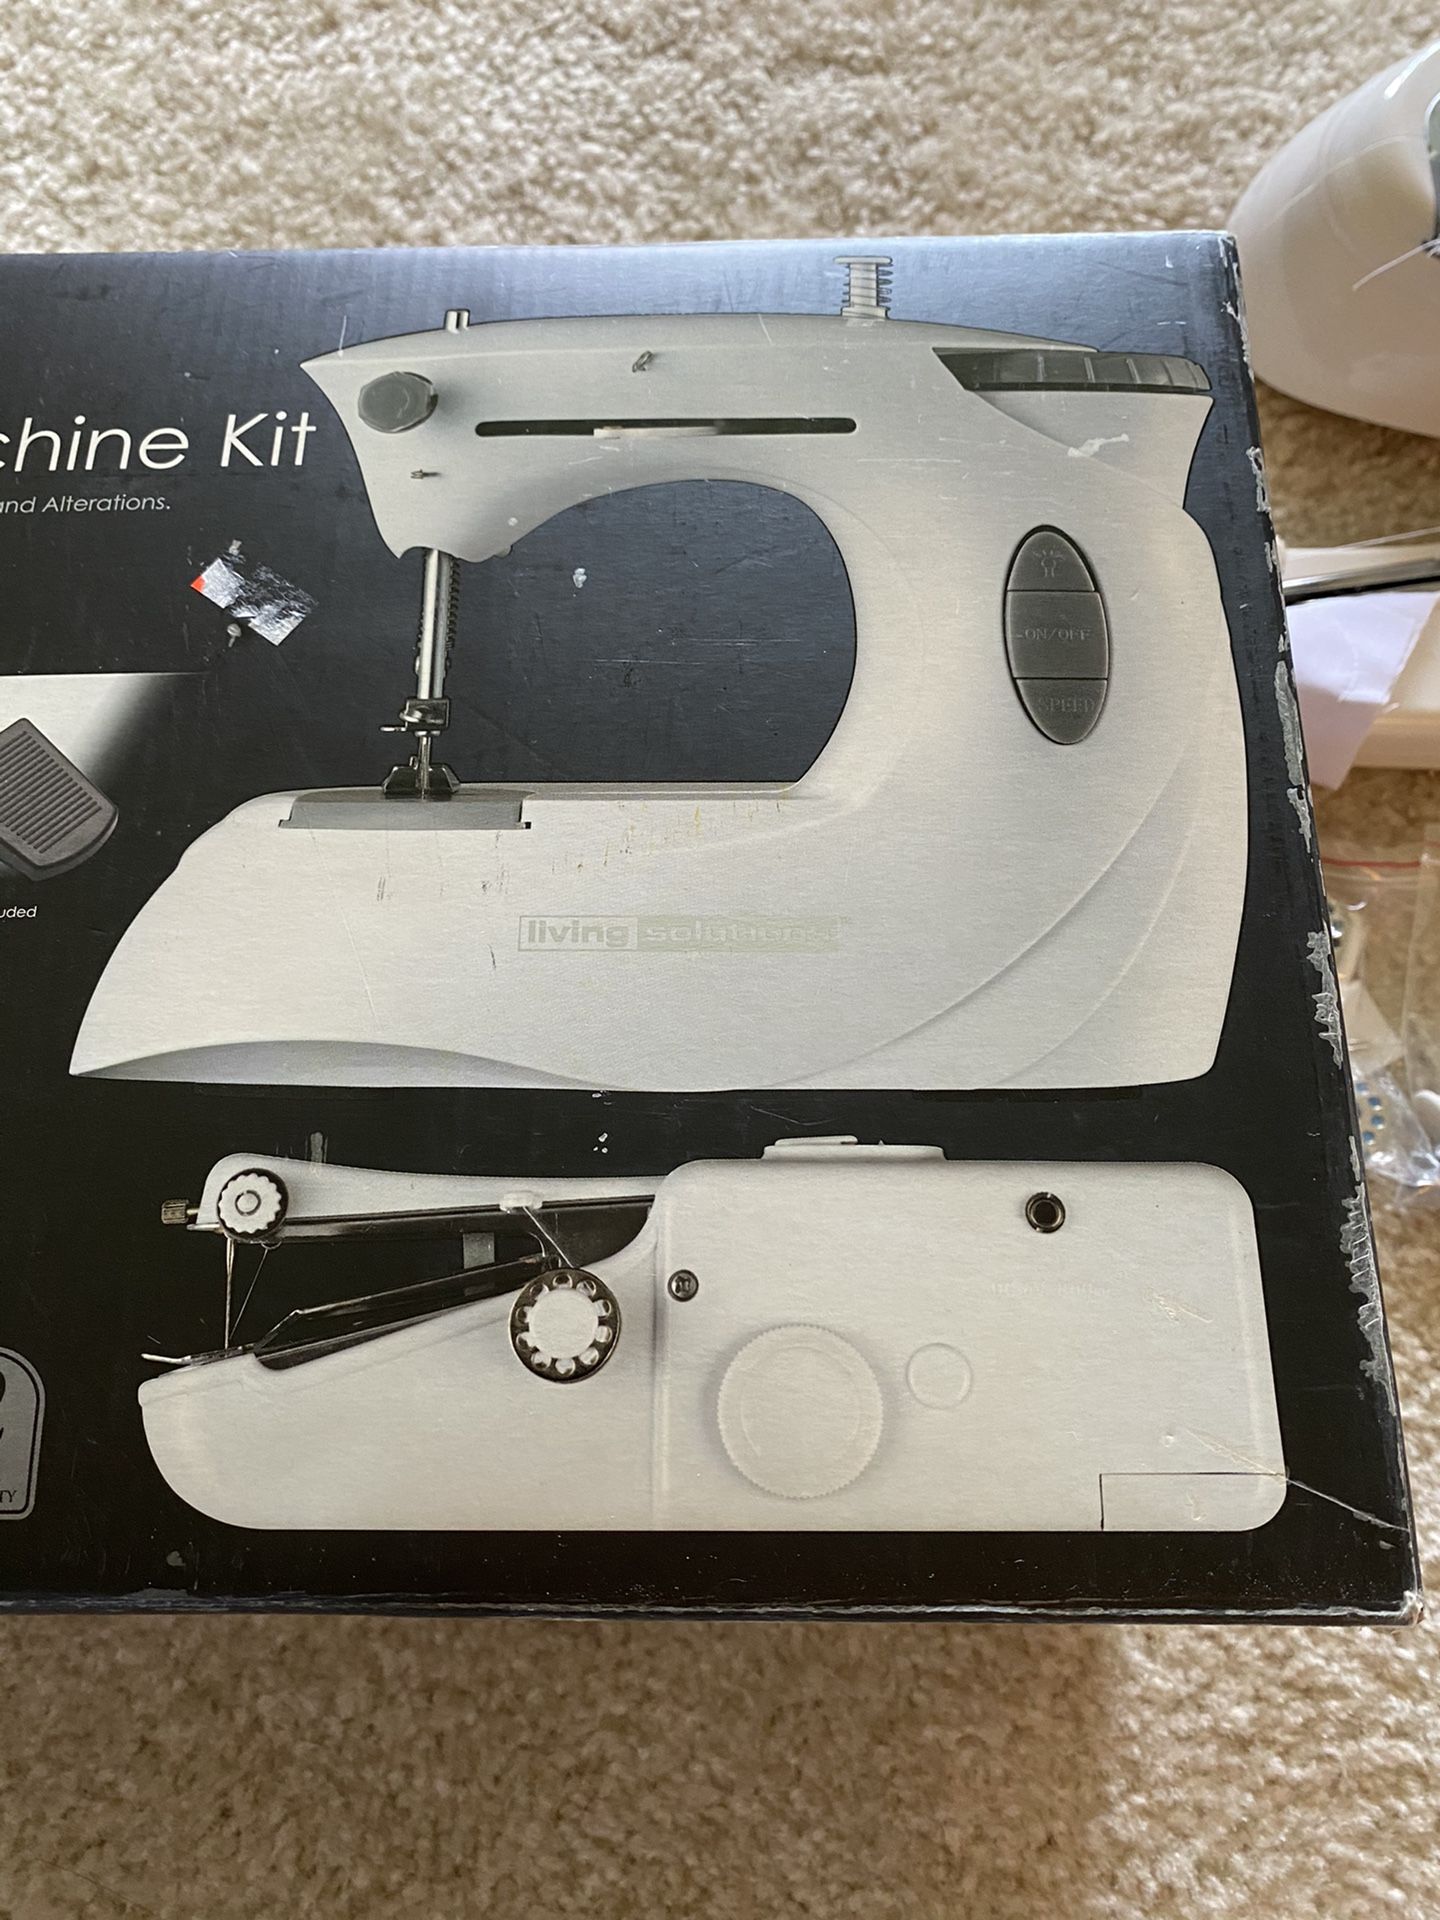 living solutions sewing machine kit